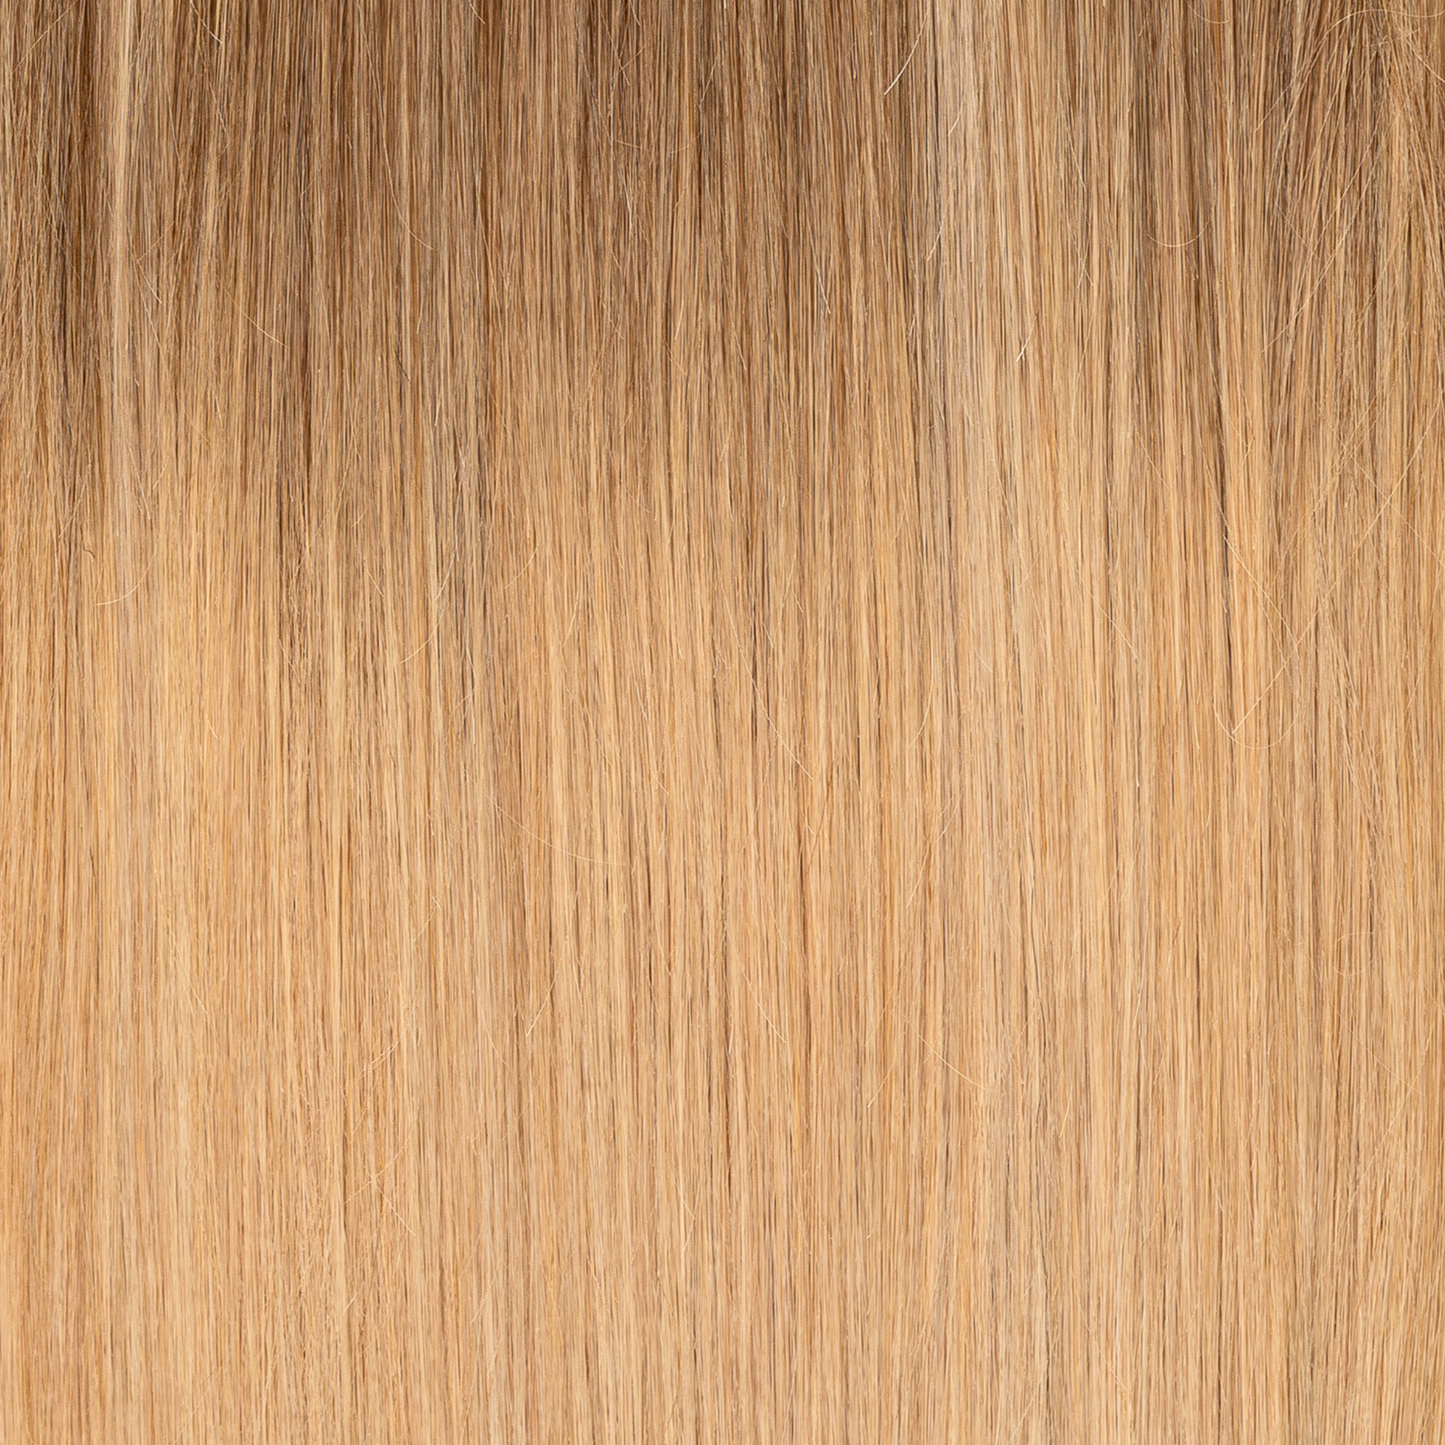 Clip-In Extensions – Beach Blonde Balayage